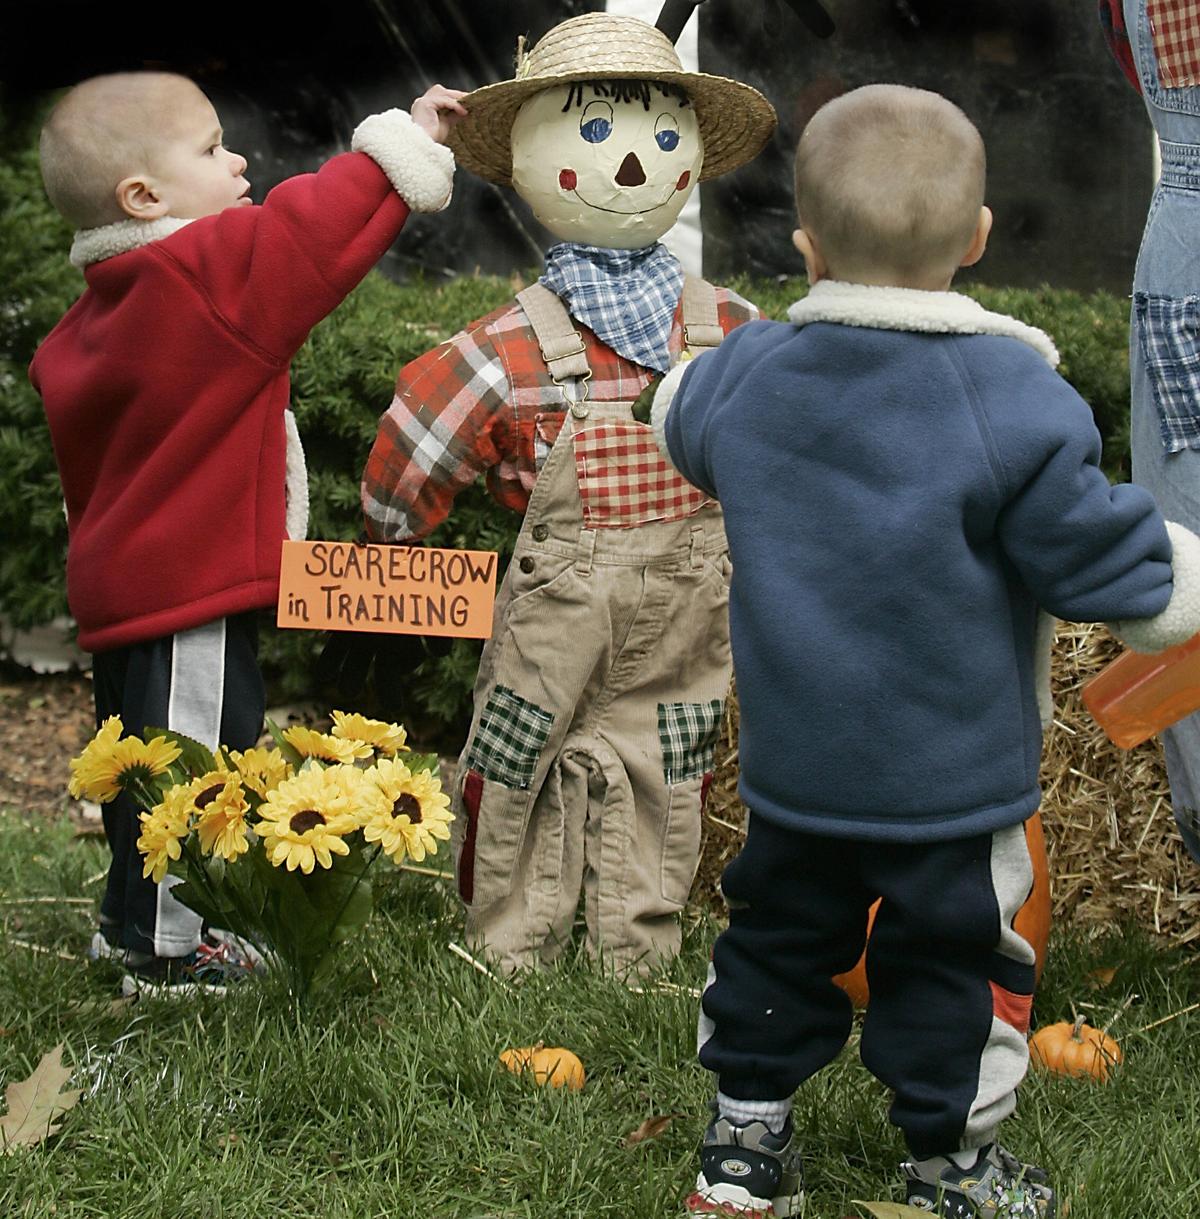 Twin brothers look over the "scarecrow in training" at the Scarecrow Festival in St. Charles, Ill., in this file photo. (JEFF HAYNES/AFP via Getty Images)